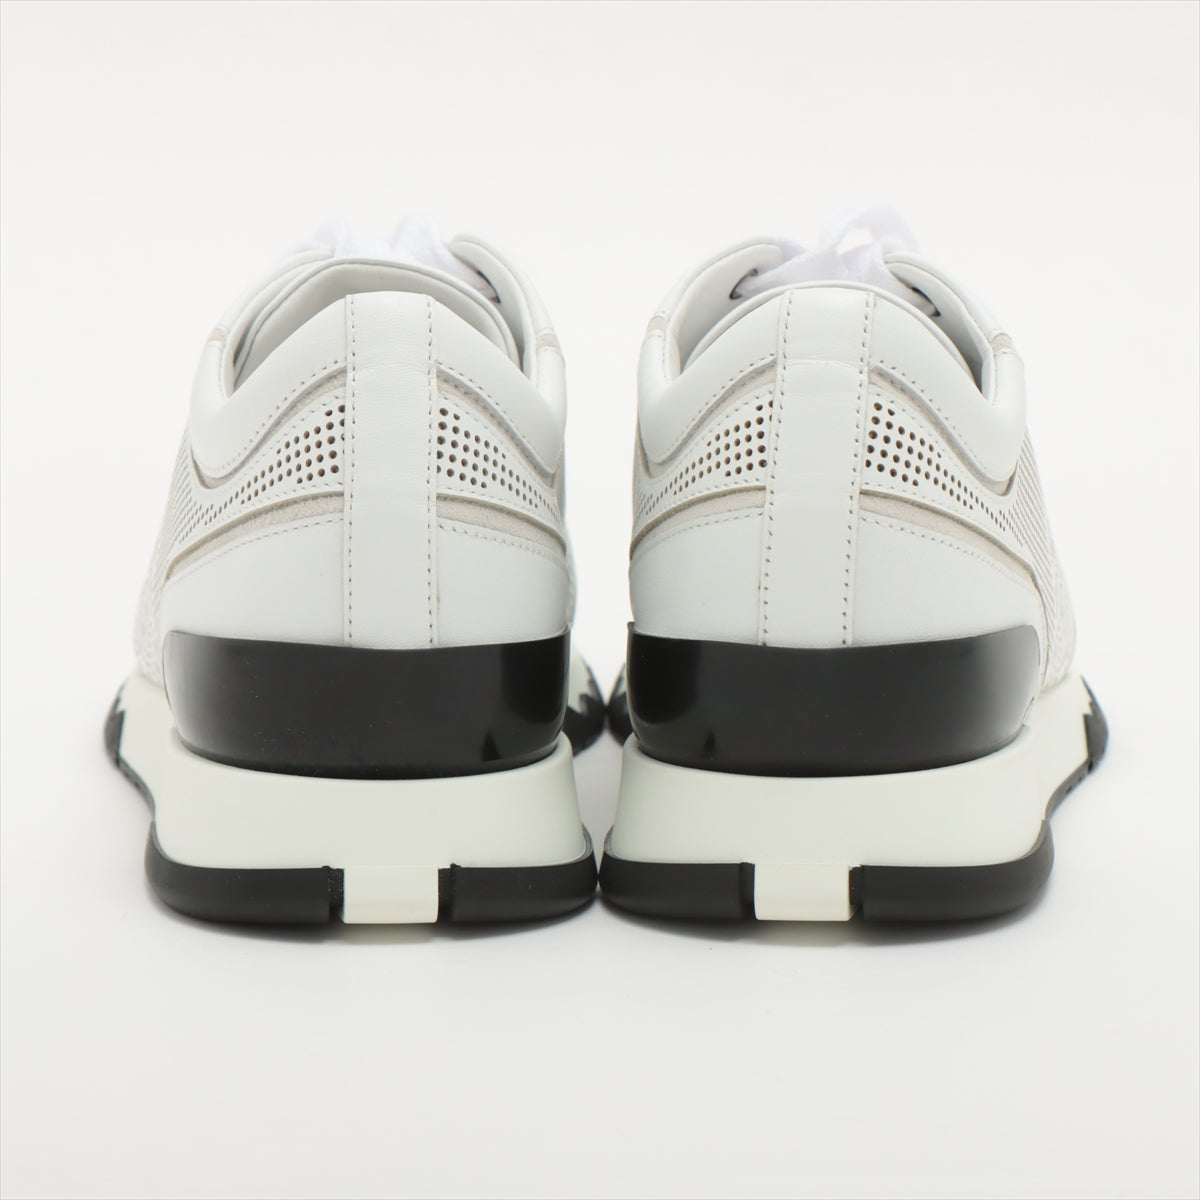 Hermès Leather Sneakers 38 Ladies' White C-Addict There is a box